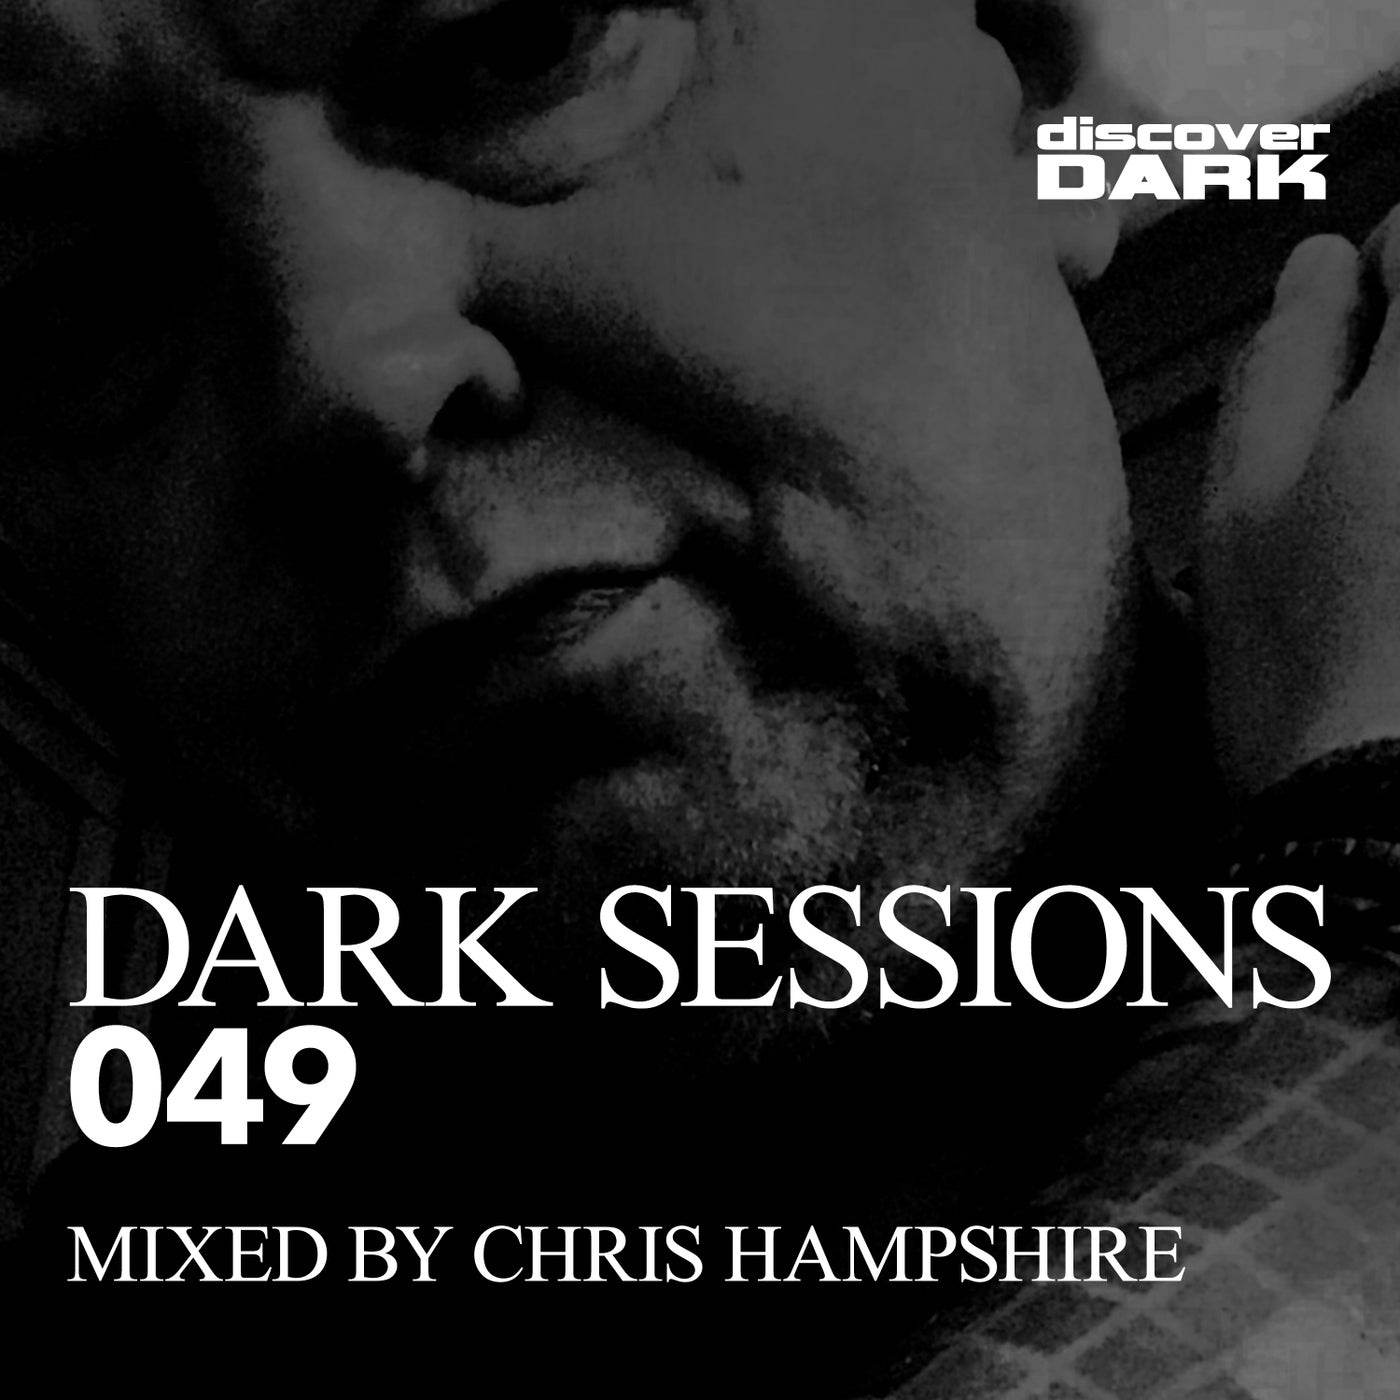 Dark Sessions 049 (Mixed by Chris Hampshire)